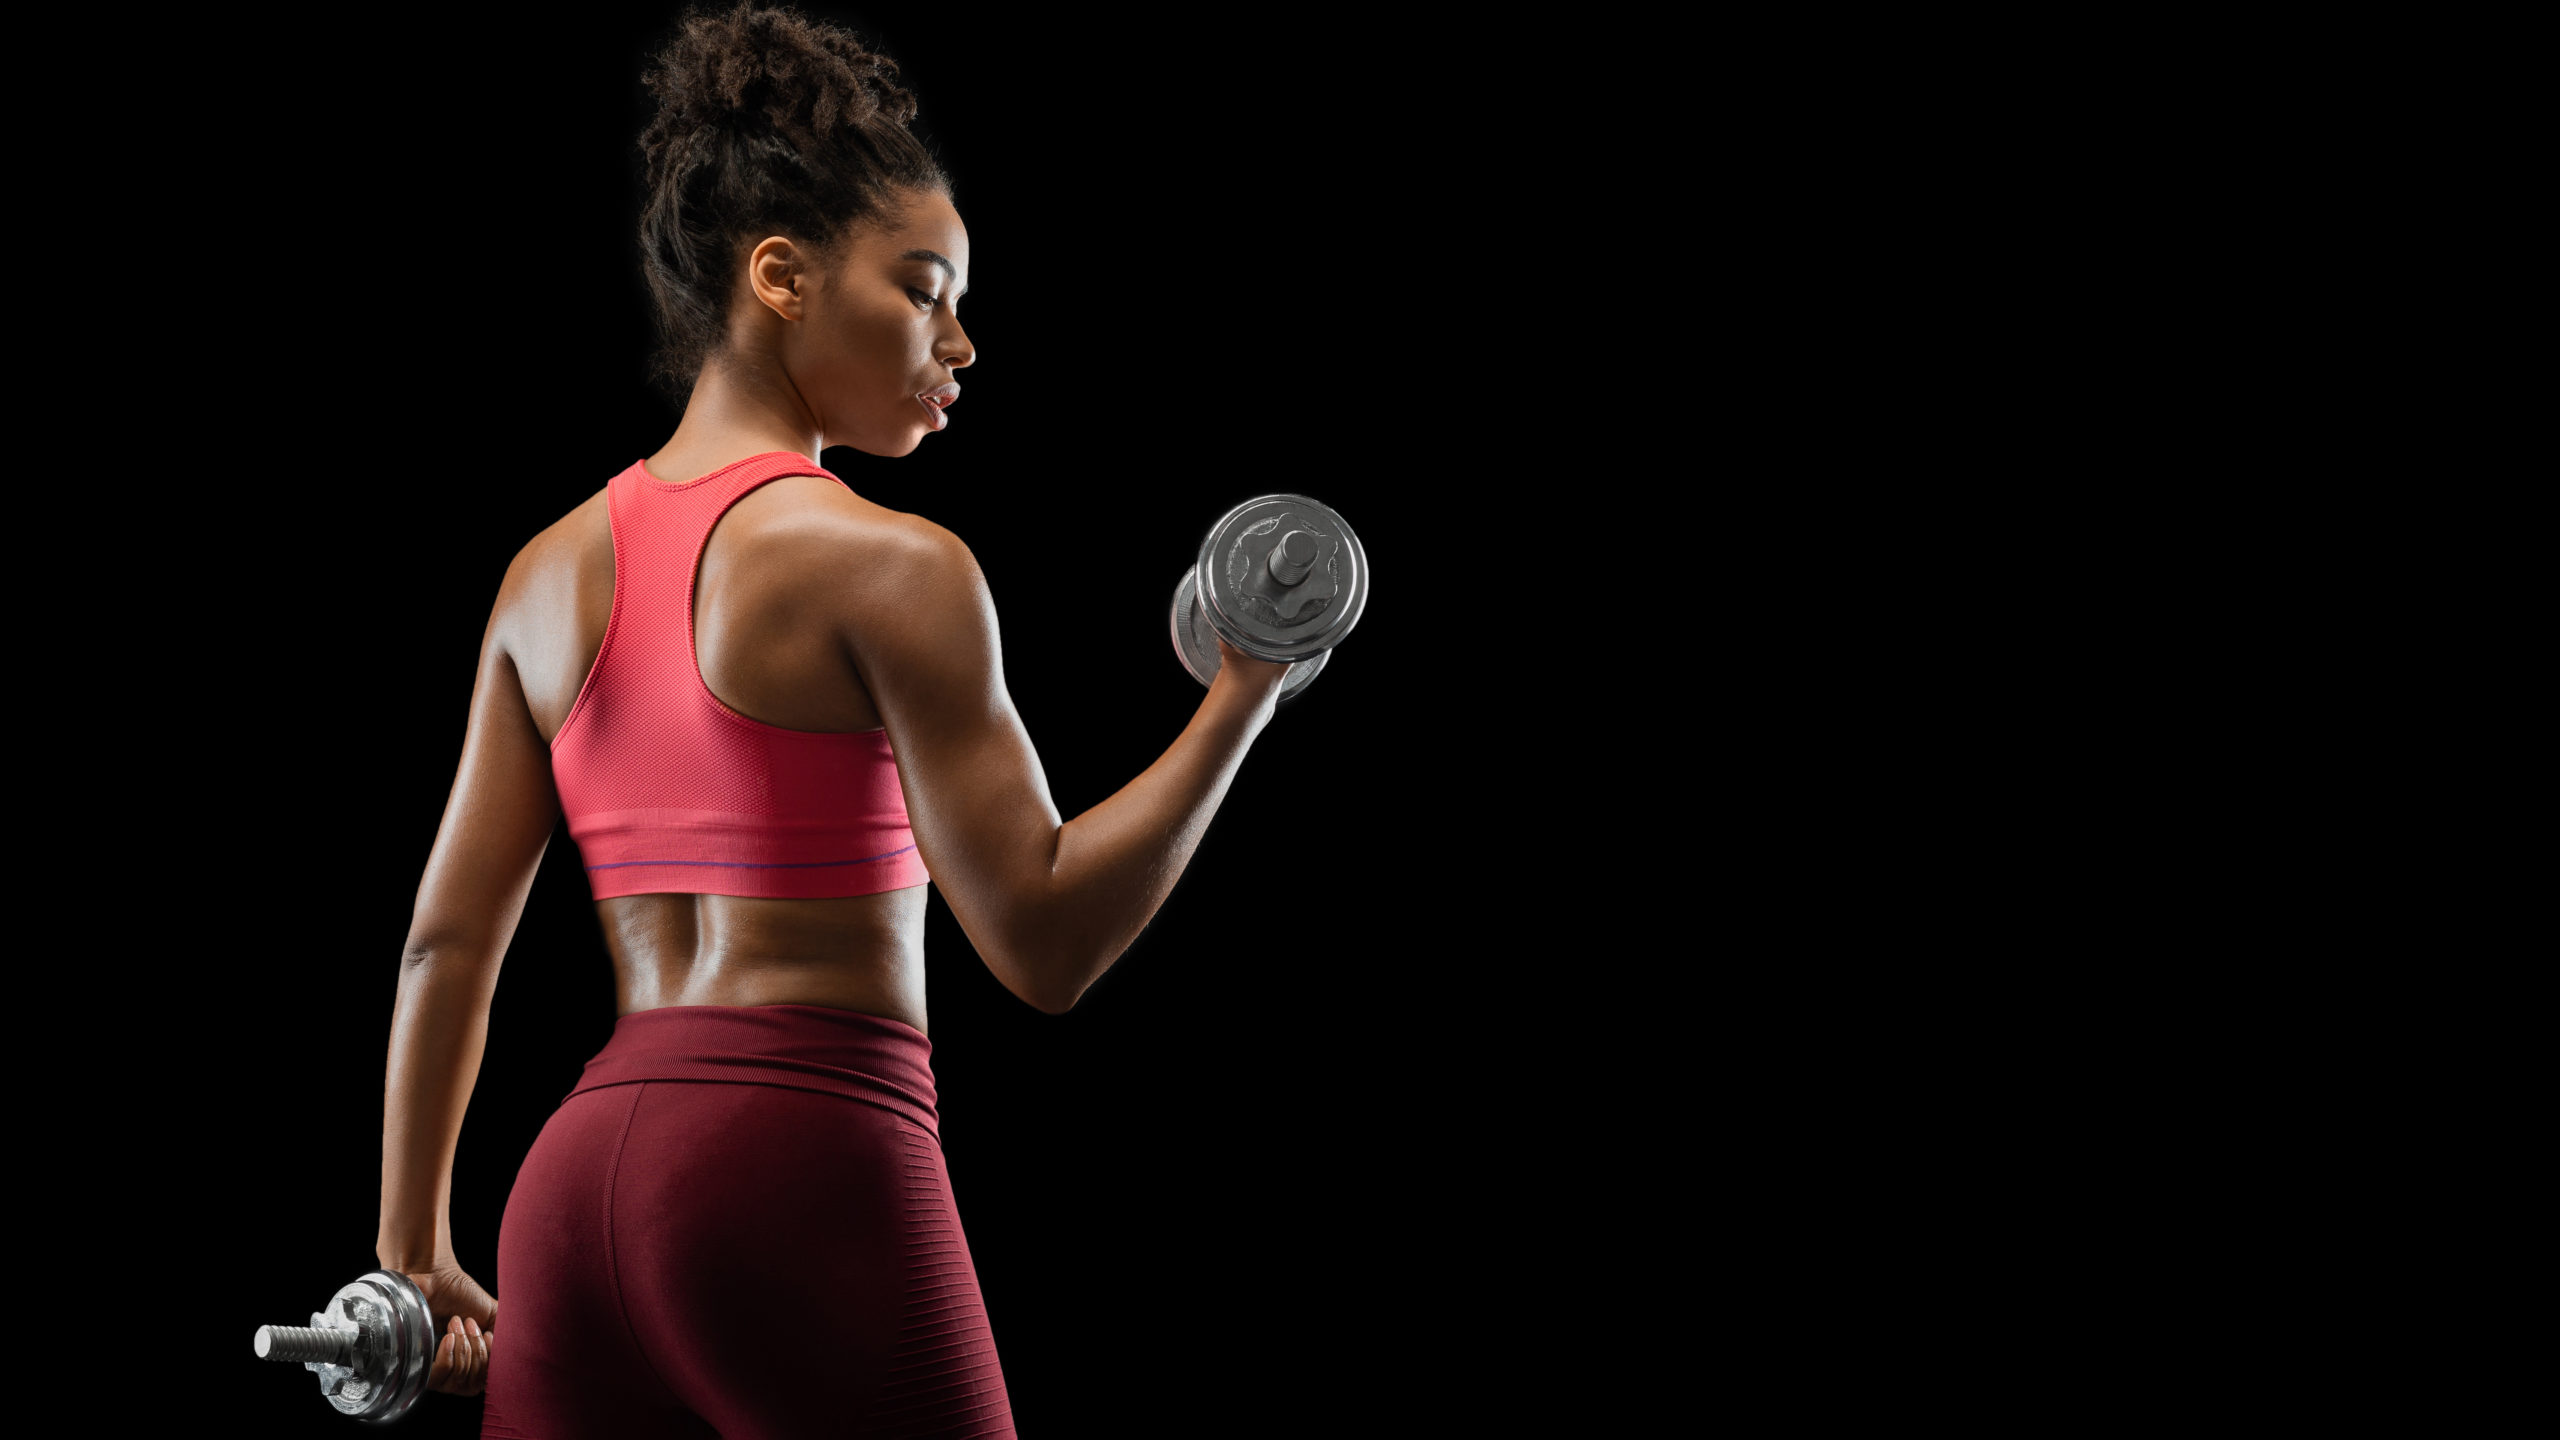 Learn To Say No Thanks - Women Who Lift Weights